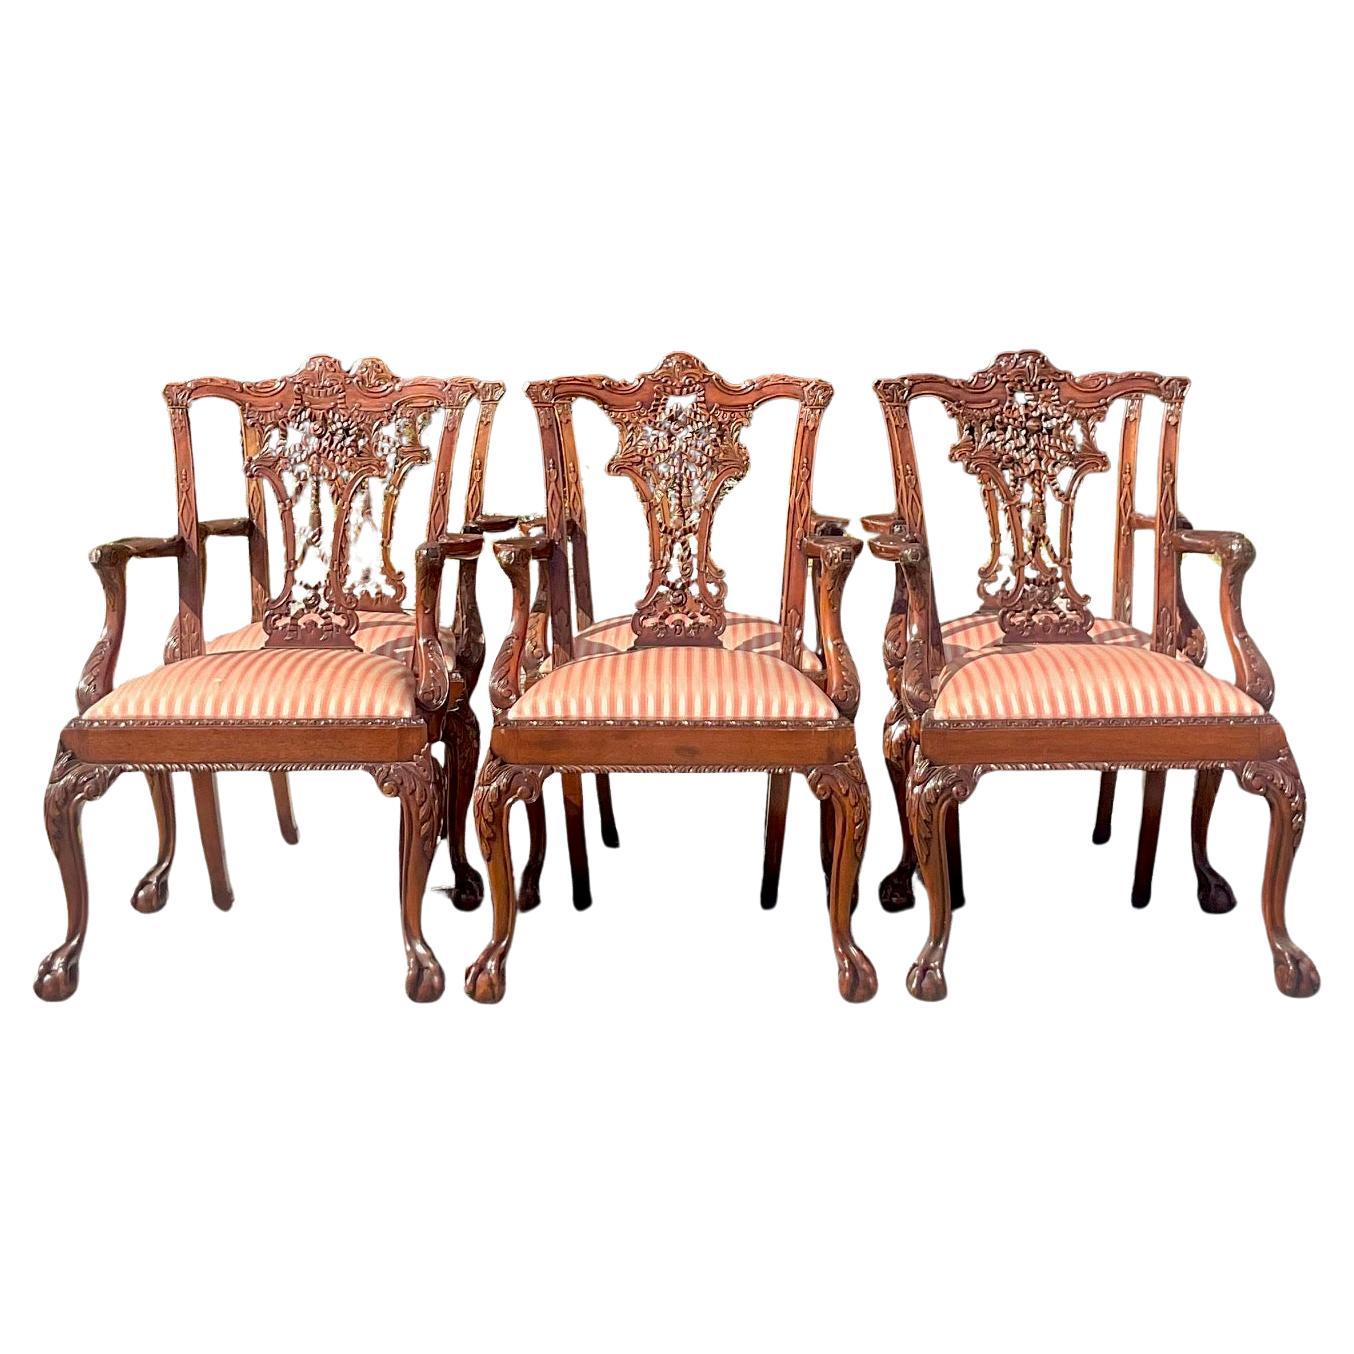 Vintage Hollywood Regency Dining Chairs - Set of six For Sale